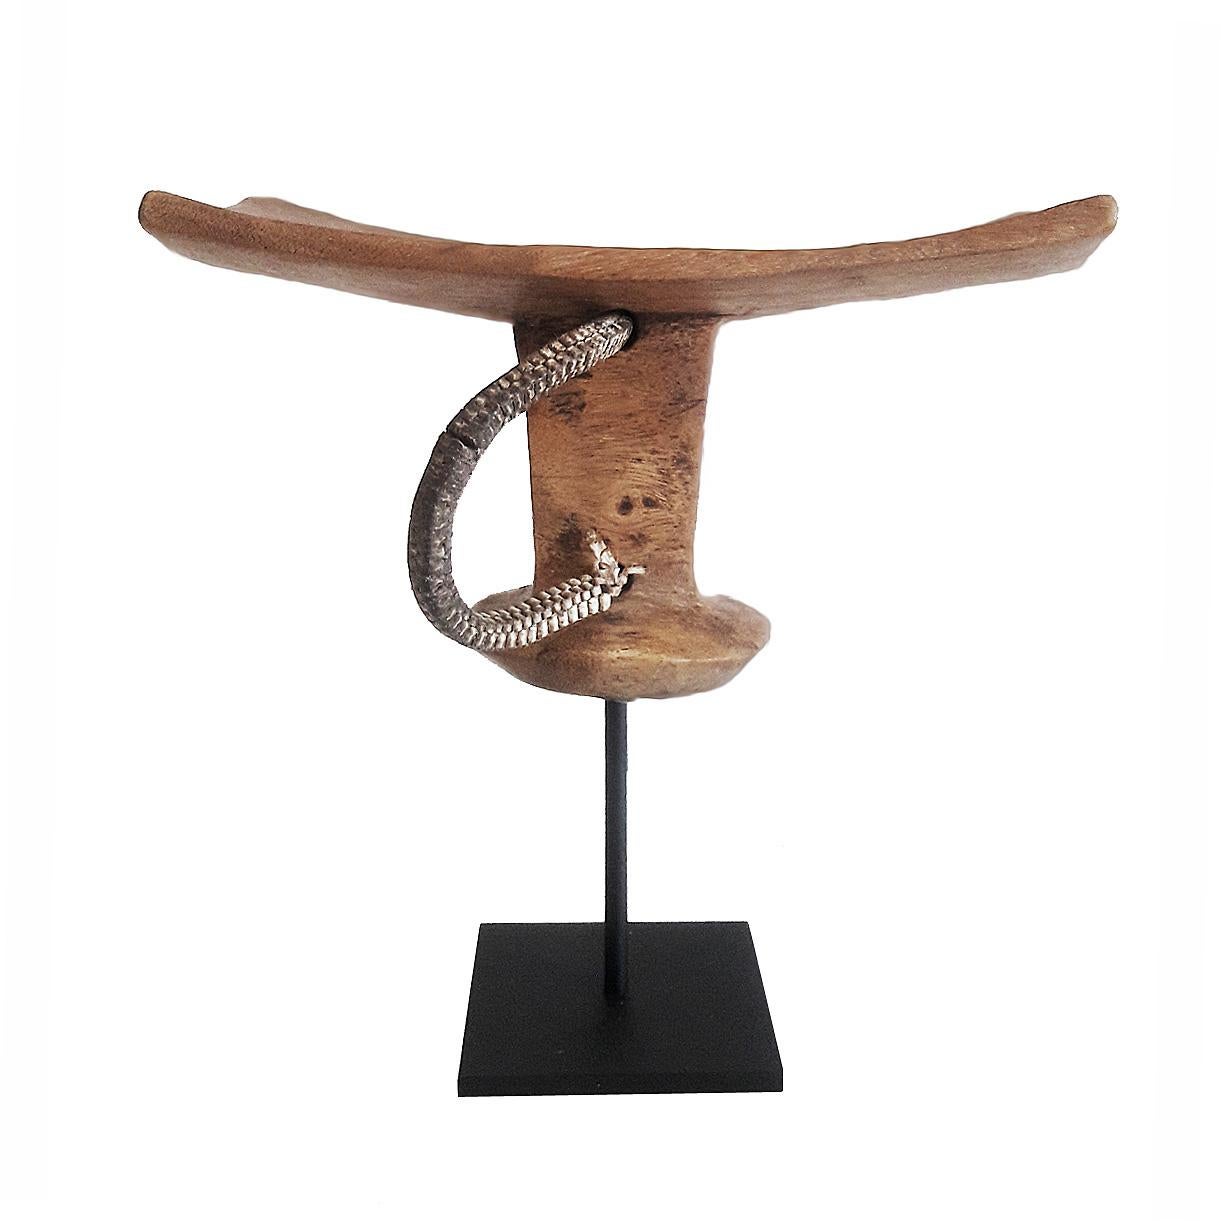 A headrest or stool, hand carved out of a single piece of teak wood. From Ethiopia, late 20th century. Mounted on a black metal stand.